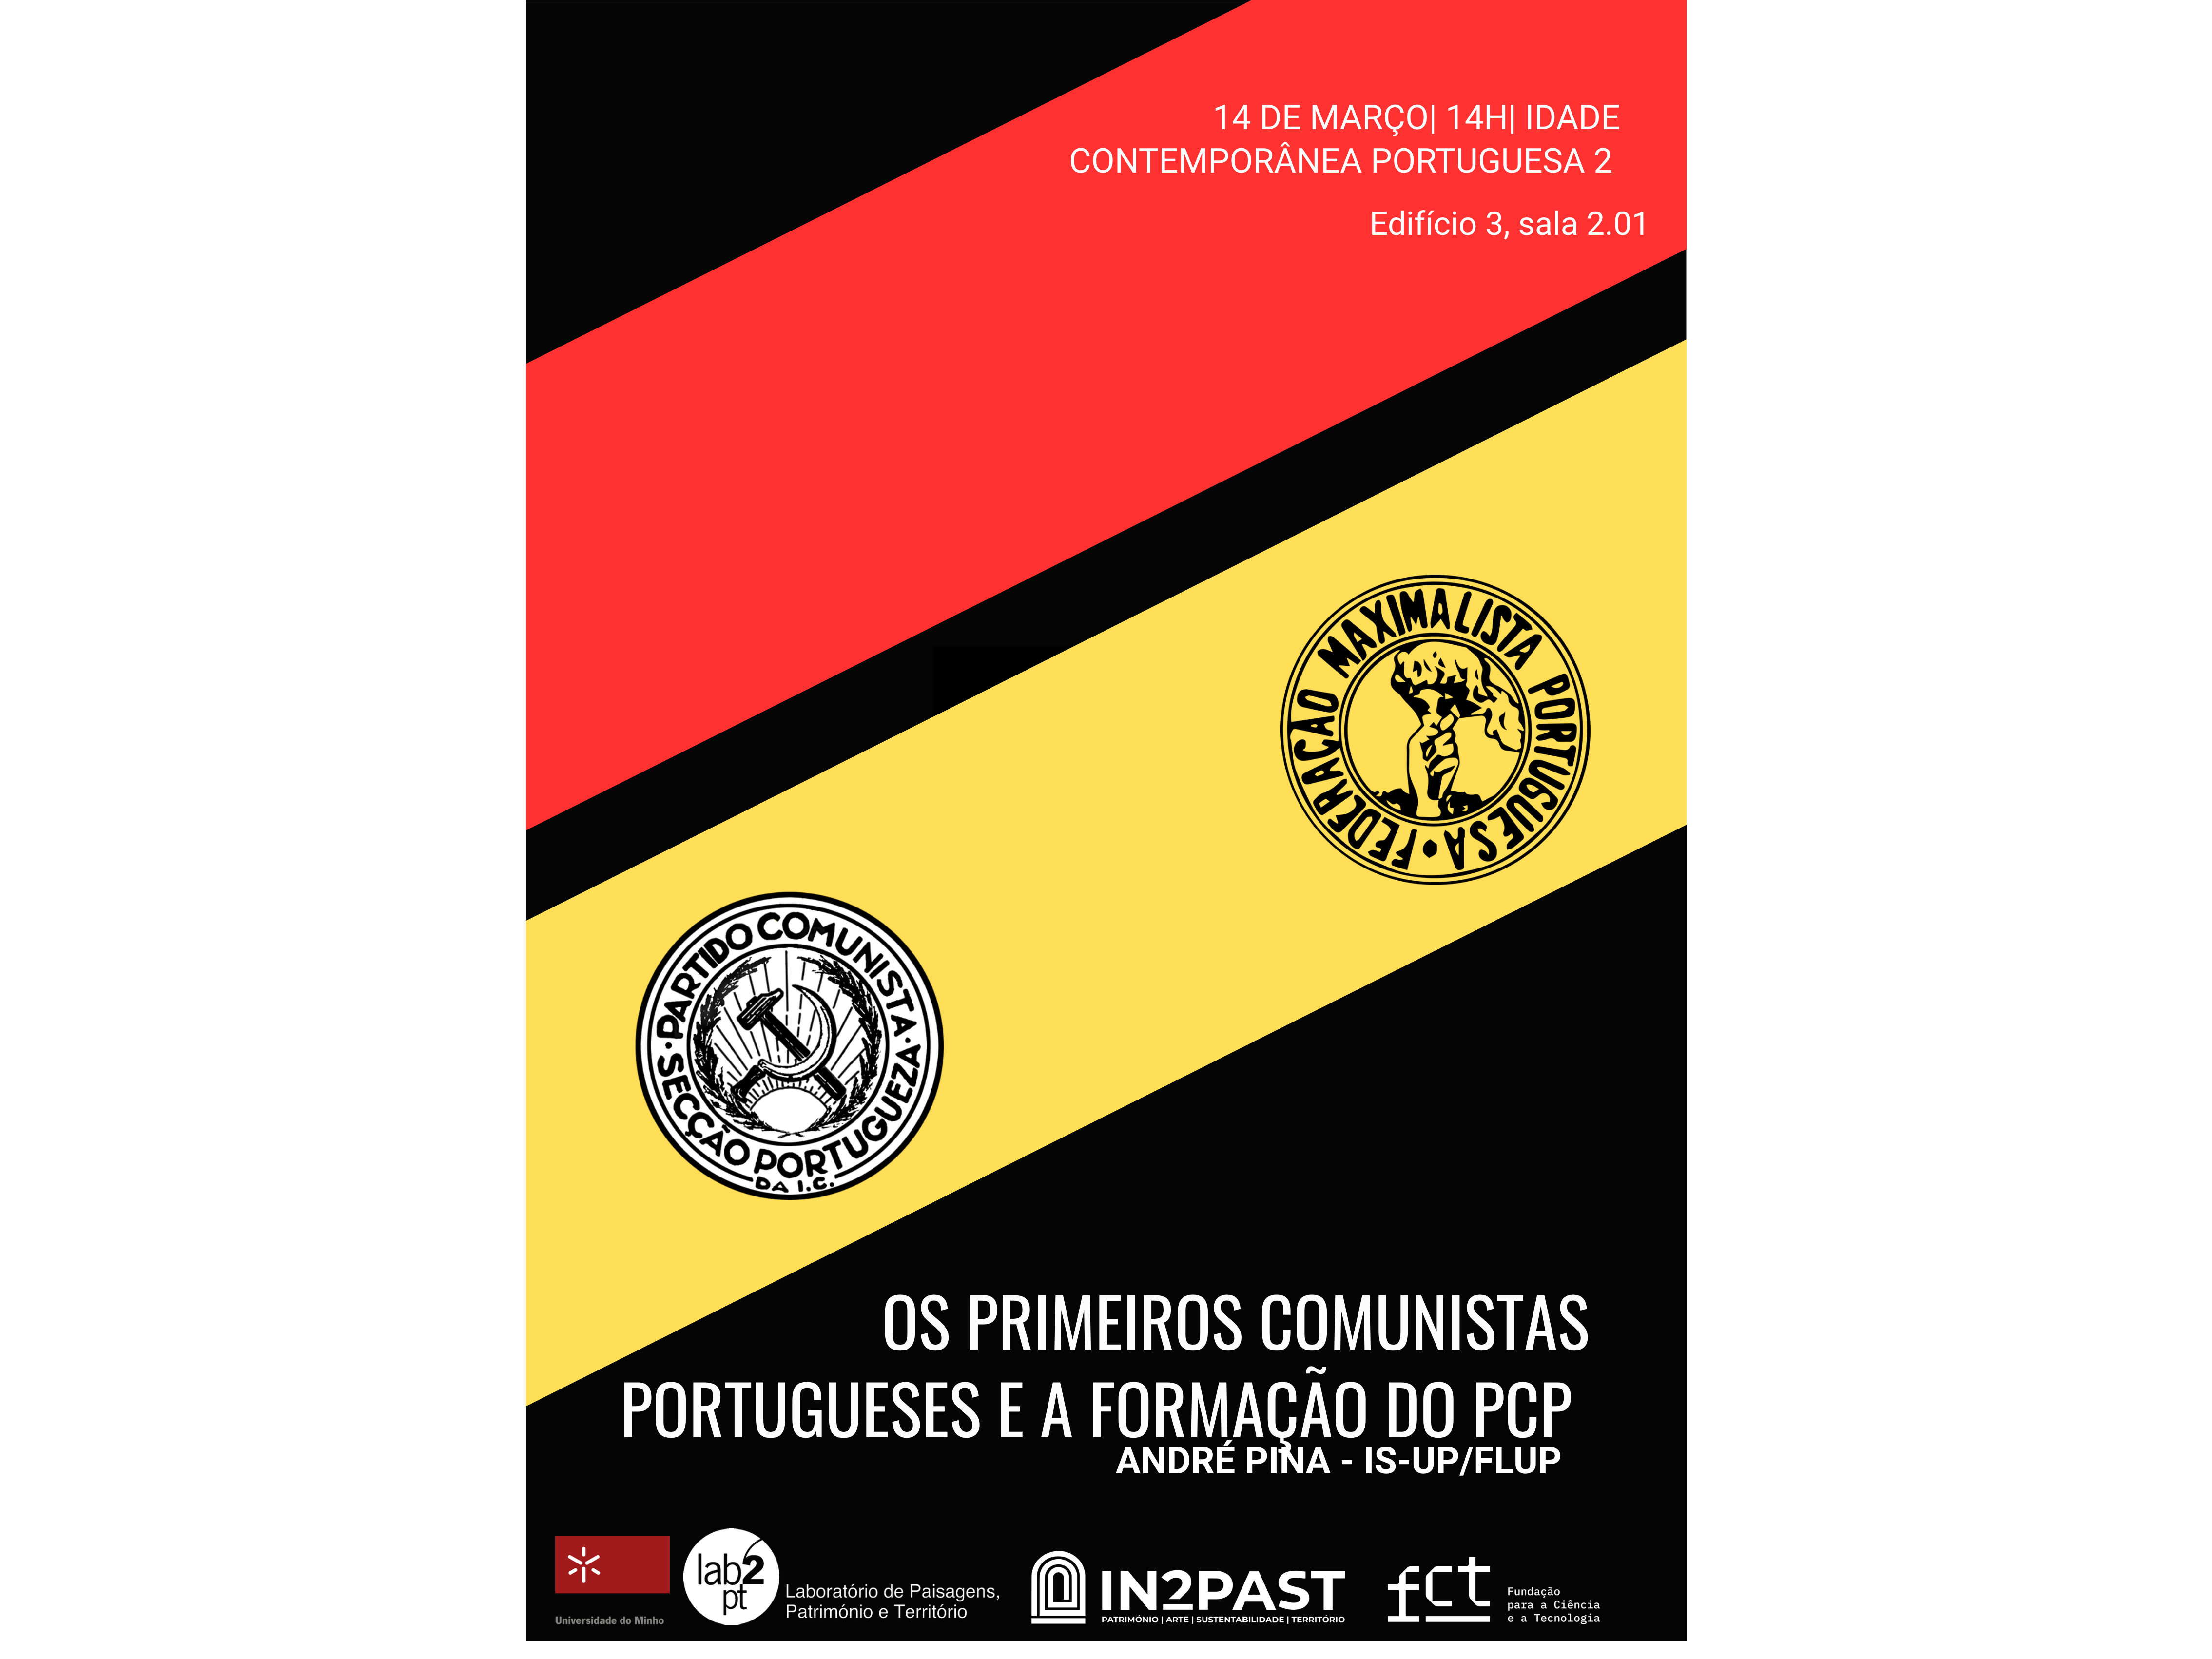 The first Portuguese communists and the formation of the Portuguese Communist Party image